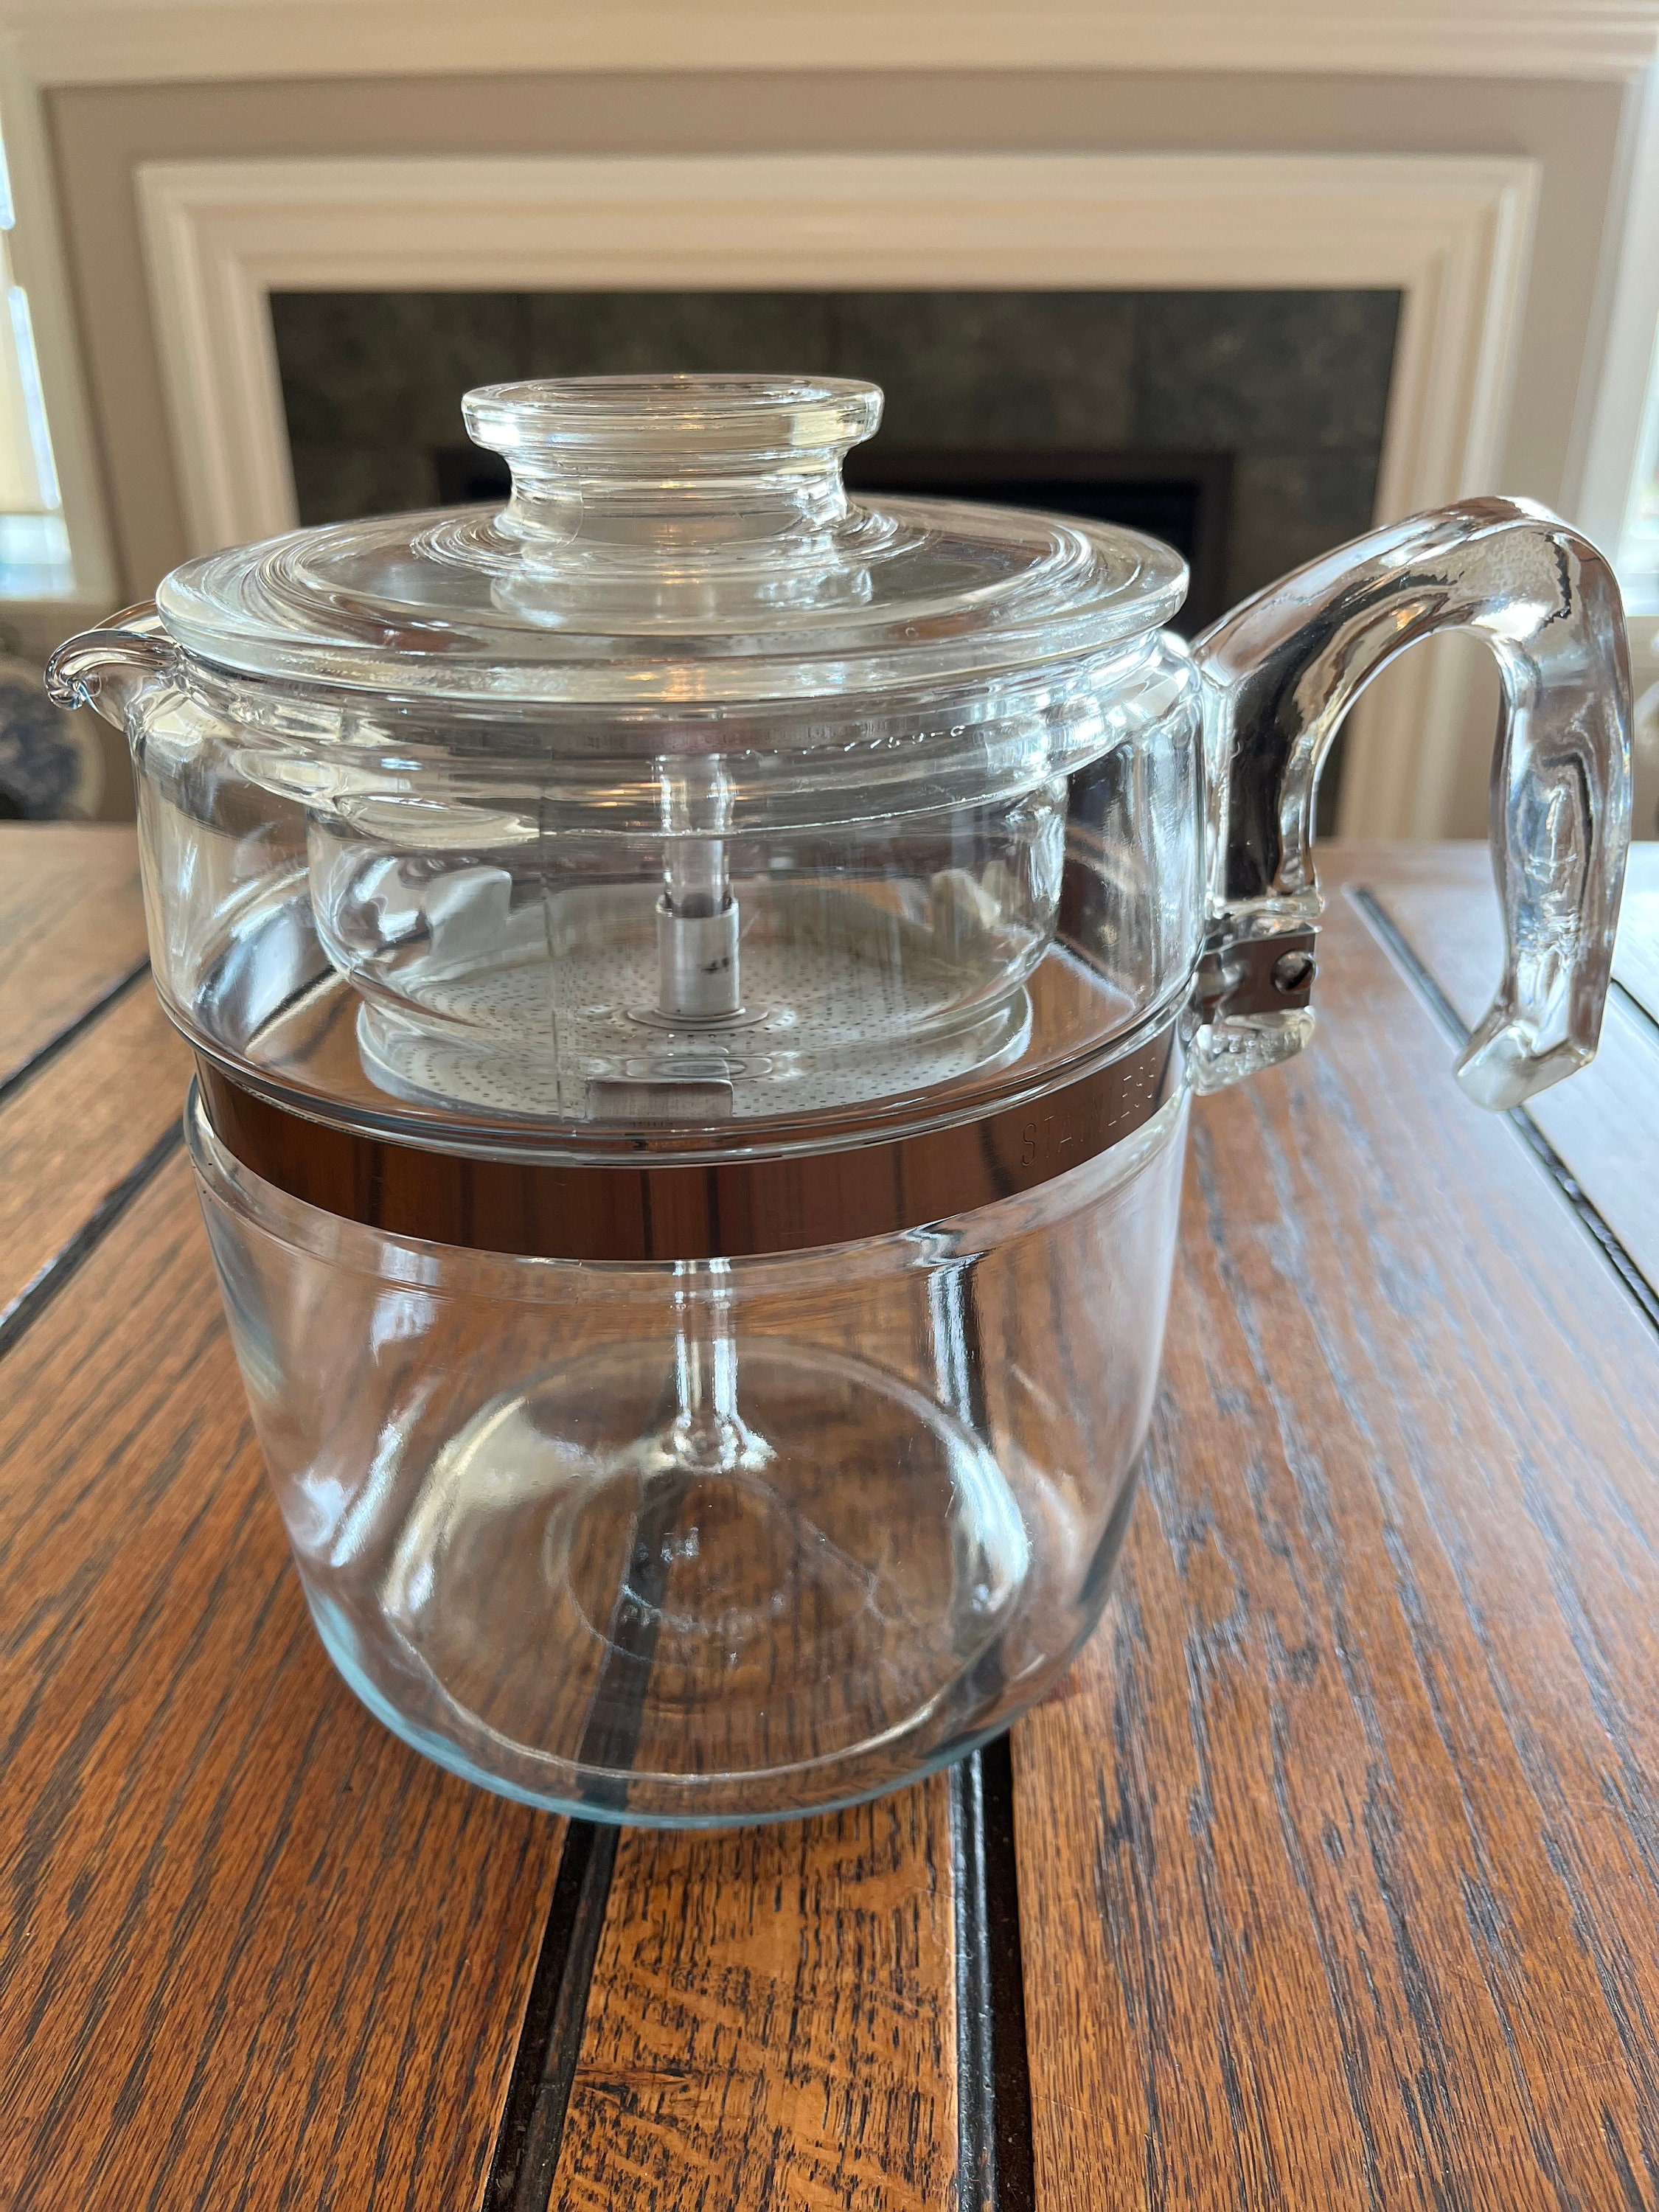  VINTAGE Corning Pyrex Flameware 4 cup Percolator Coffee Pot:  Other Products: Home & Kitchen